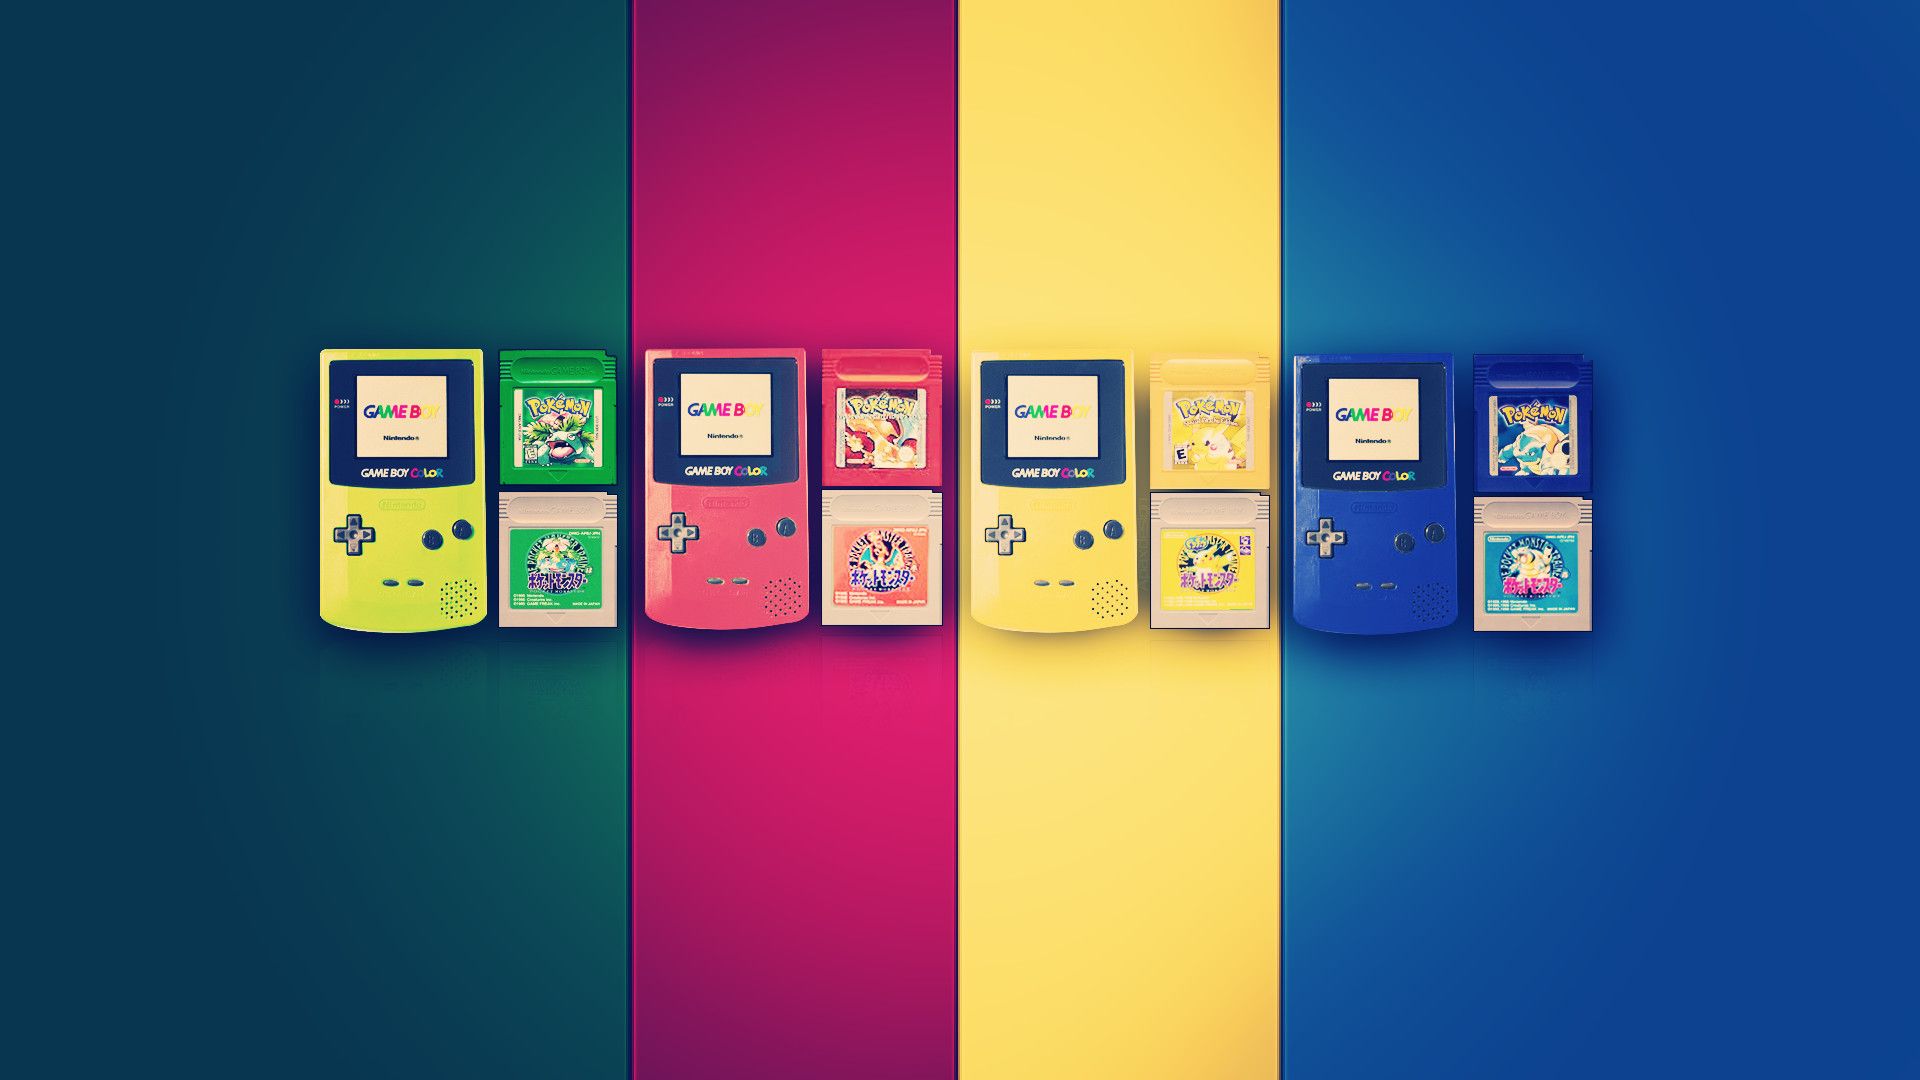 A collection of Gameboy games lined up on a colorful background - Nintendo